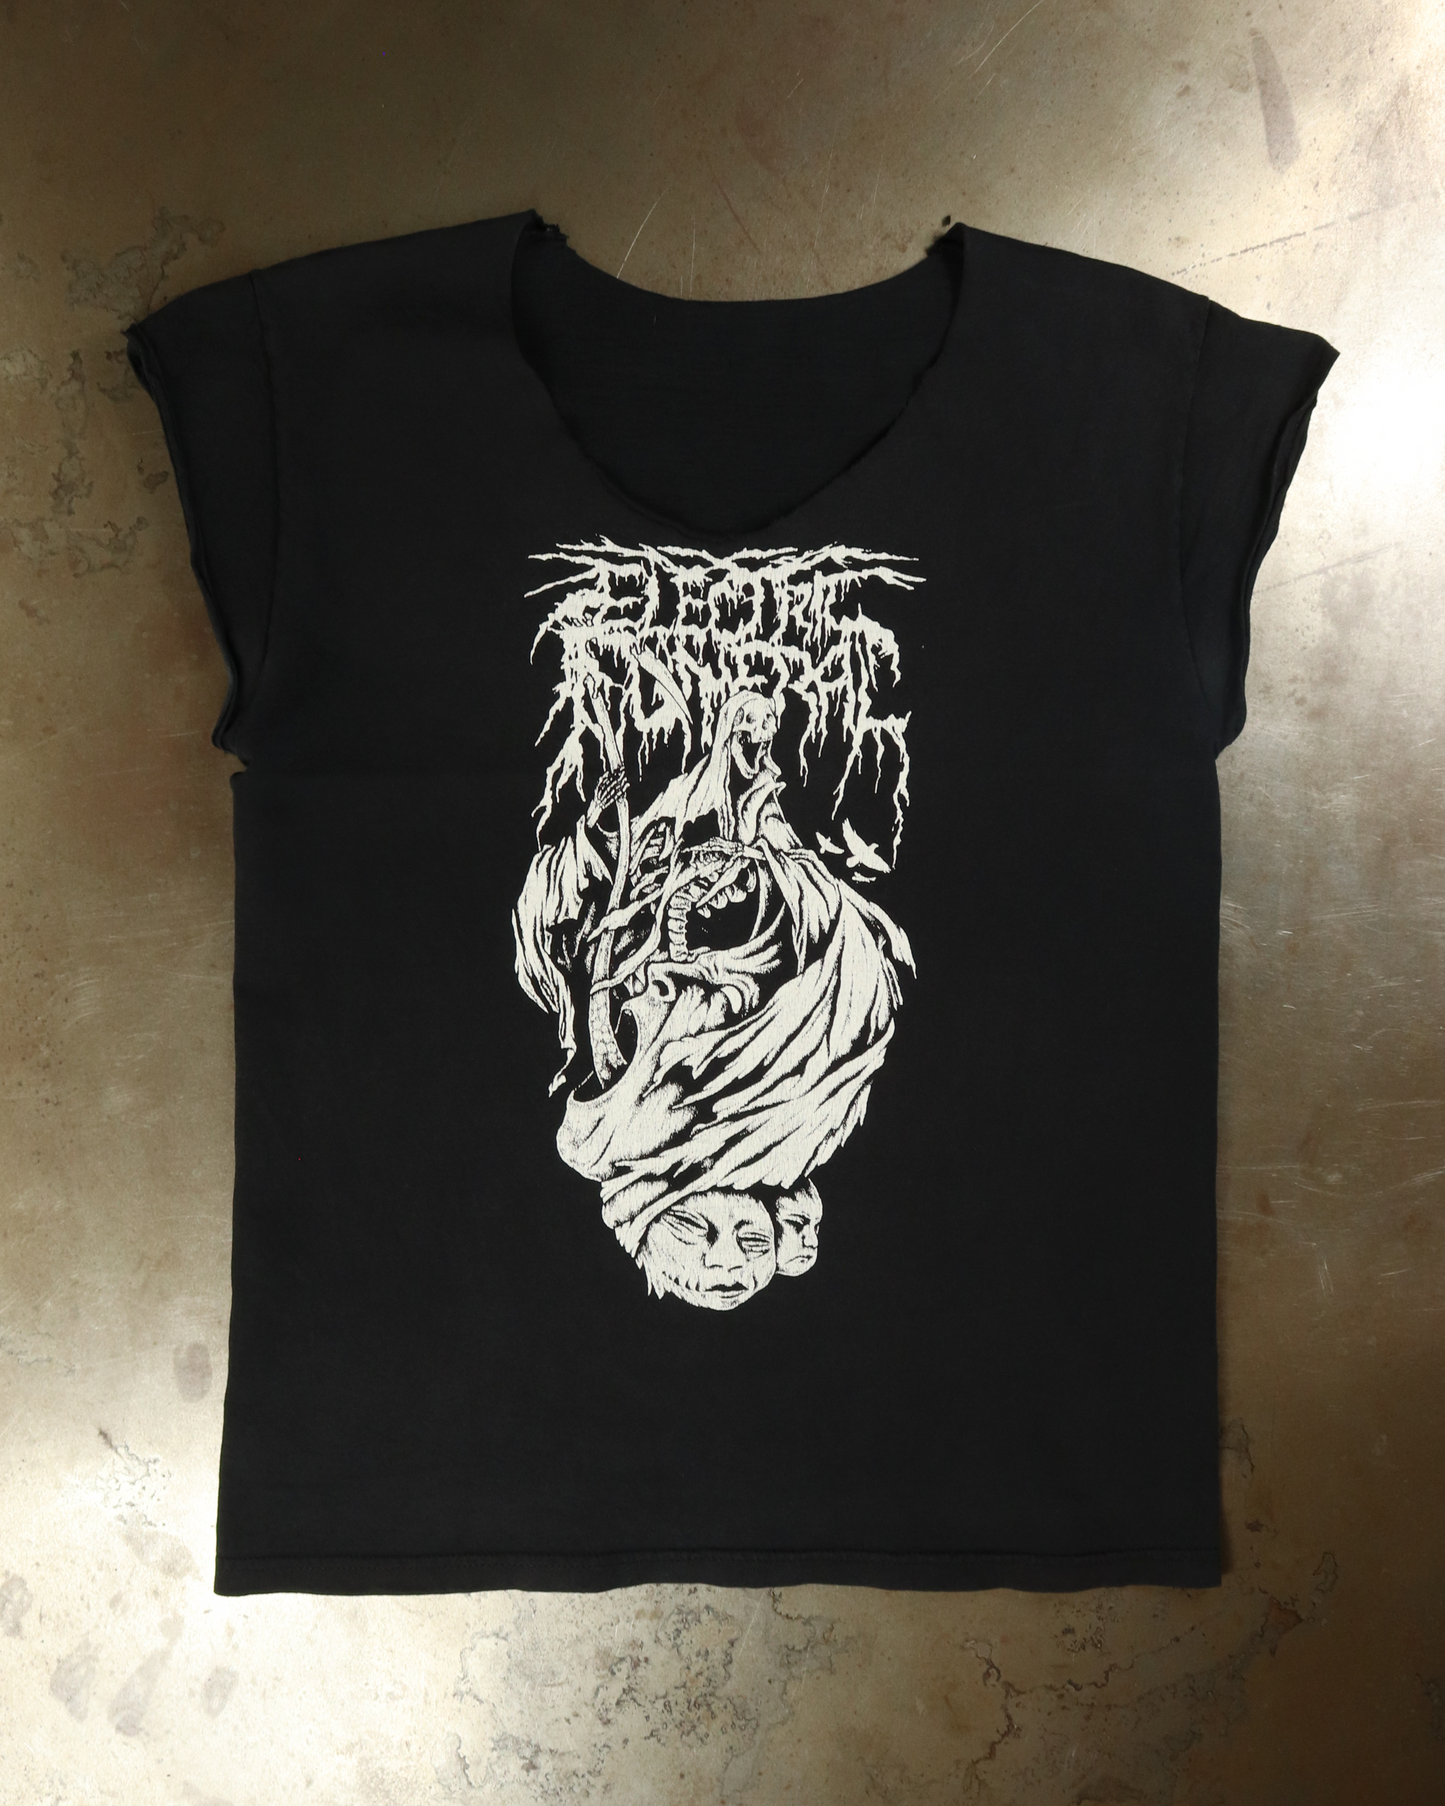 „Electric Funeral” printed T-shirt